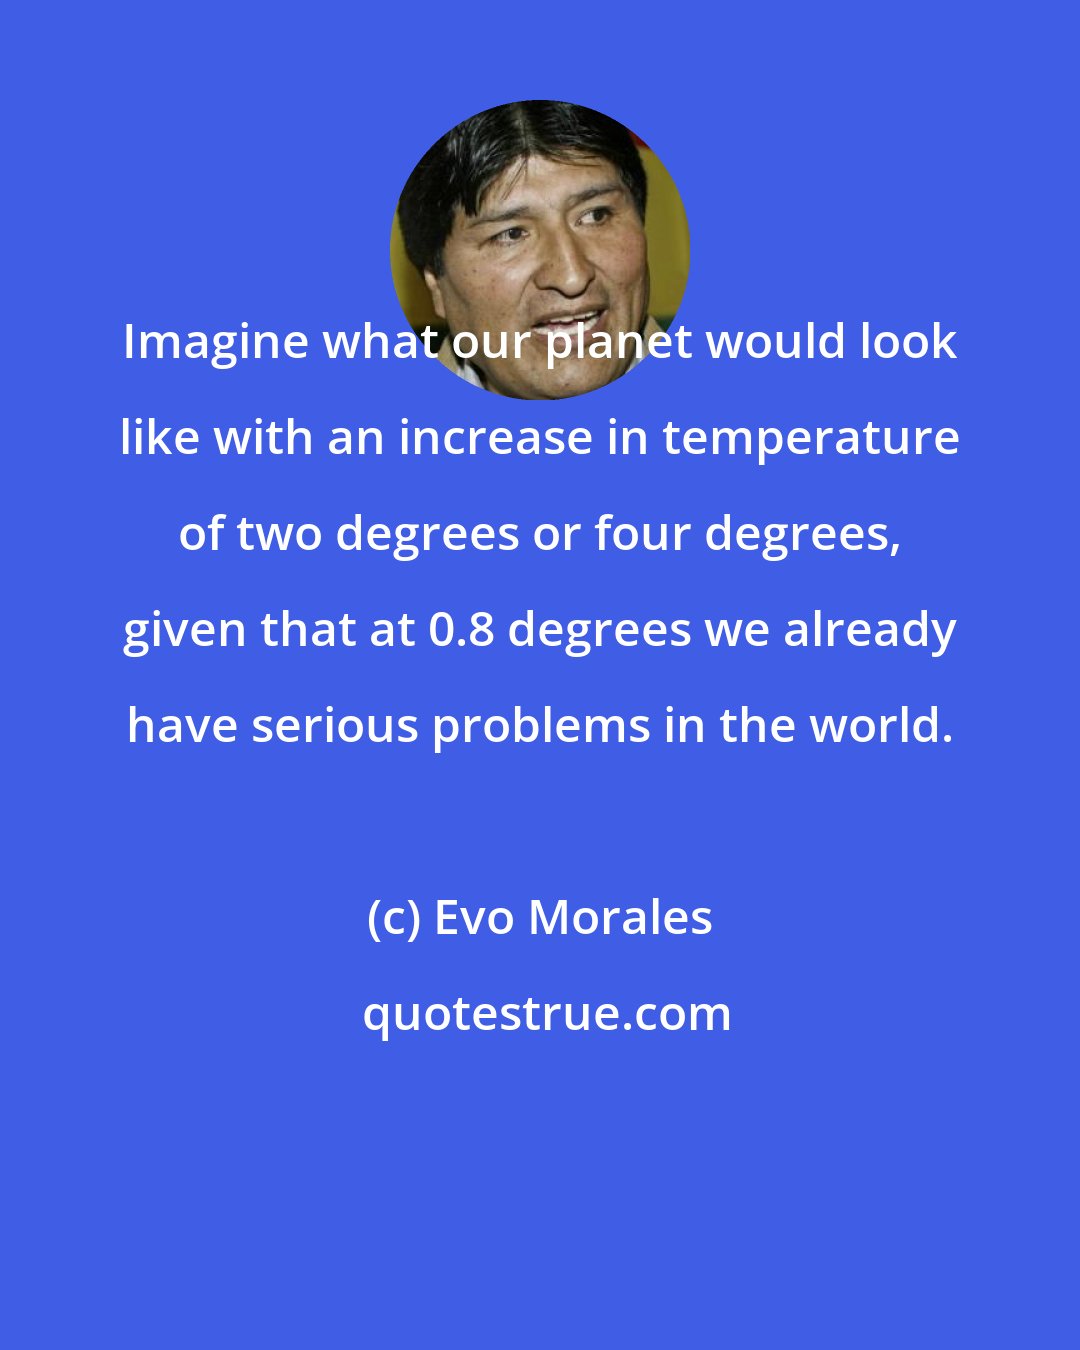 Evo Morales: Imagine what our planet would look like with an increase in temperature of two degrees or four degrees, given that at 0.8 degrees we already have serious problems in the world.